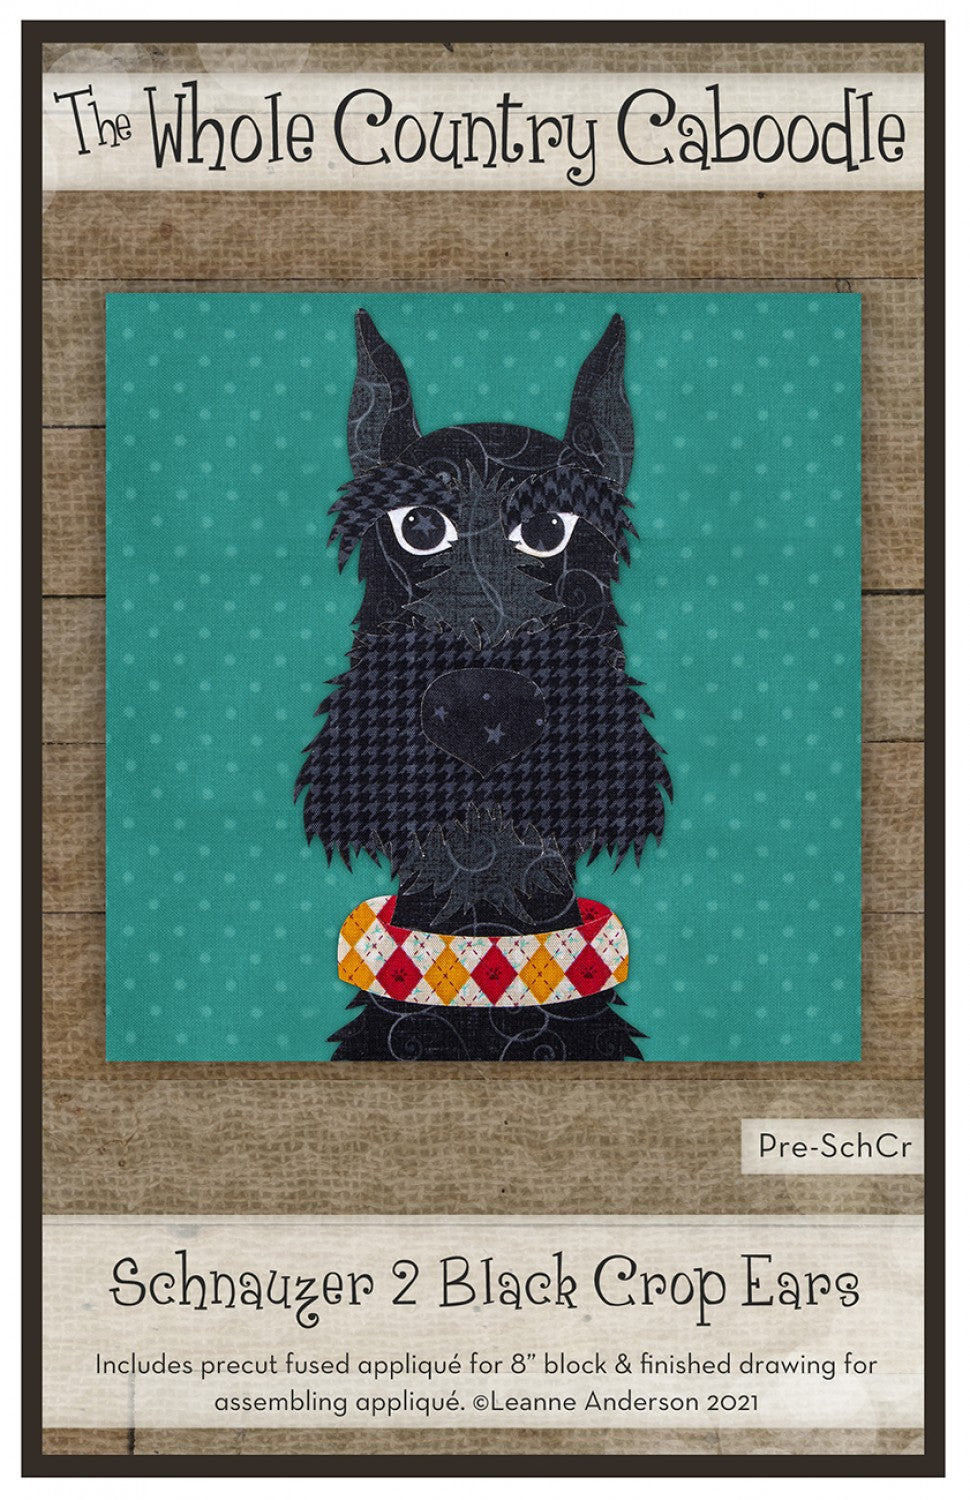 Schnauzer 2 Black Crop Ears Precut Fused Applique Pack Patterns Quilting Books Patterns And 